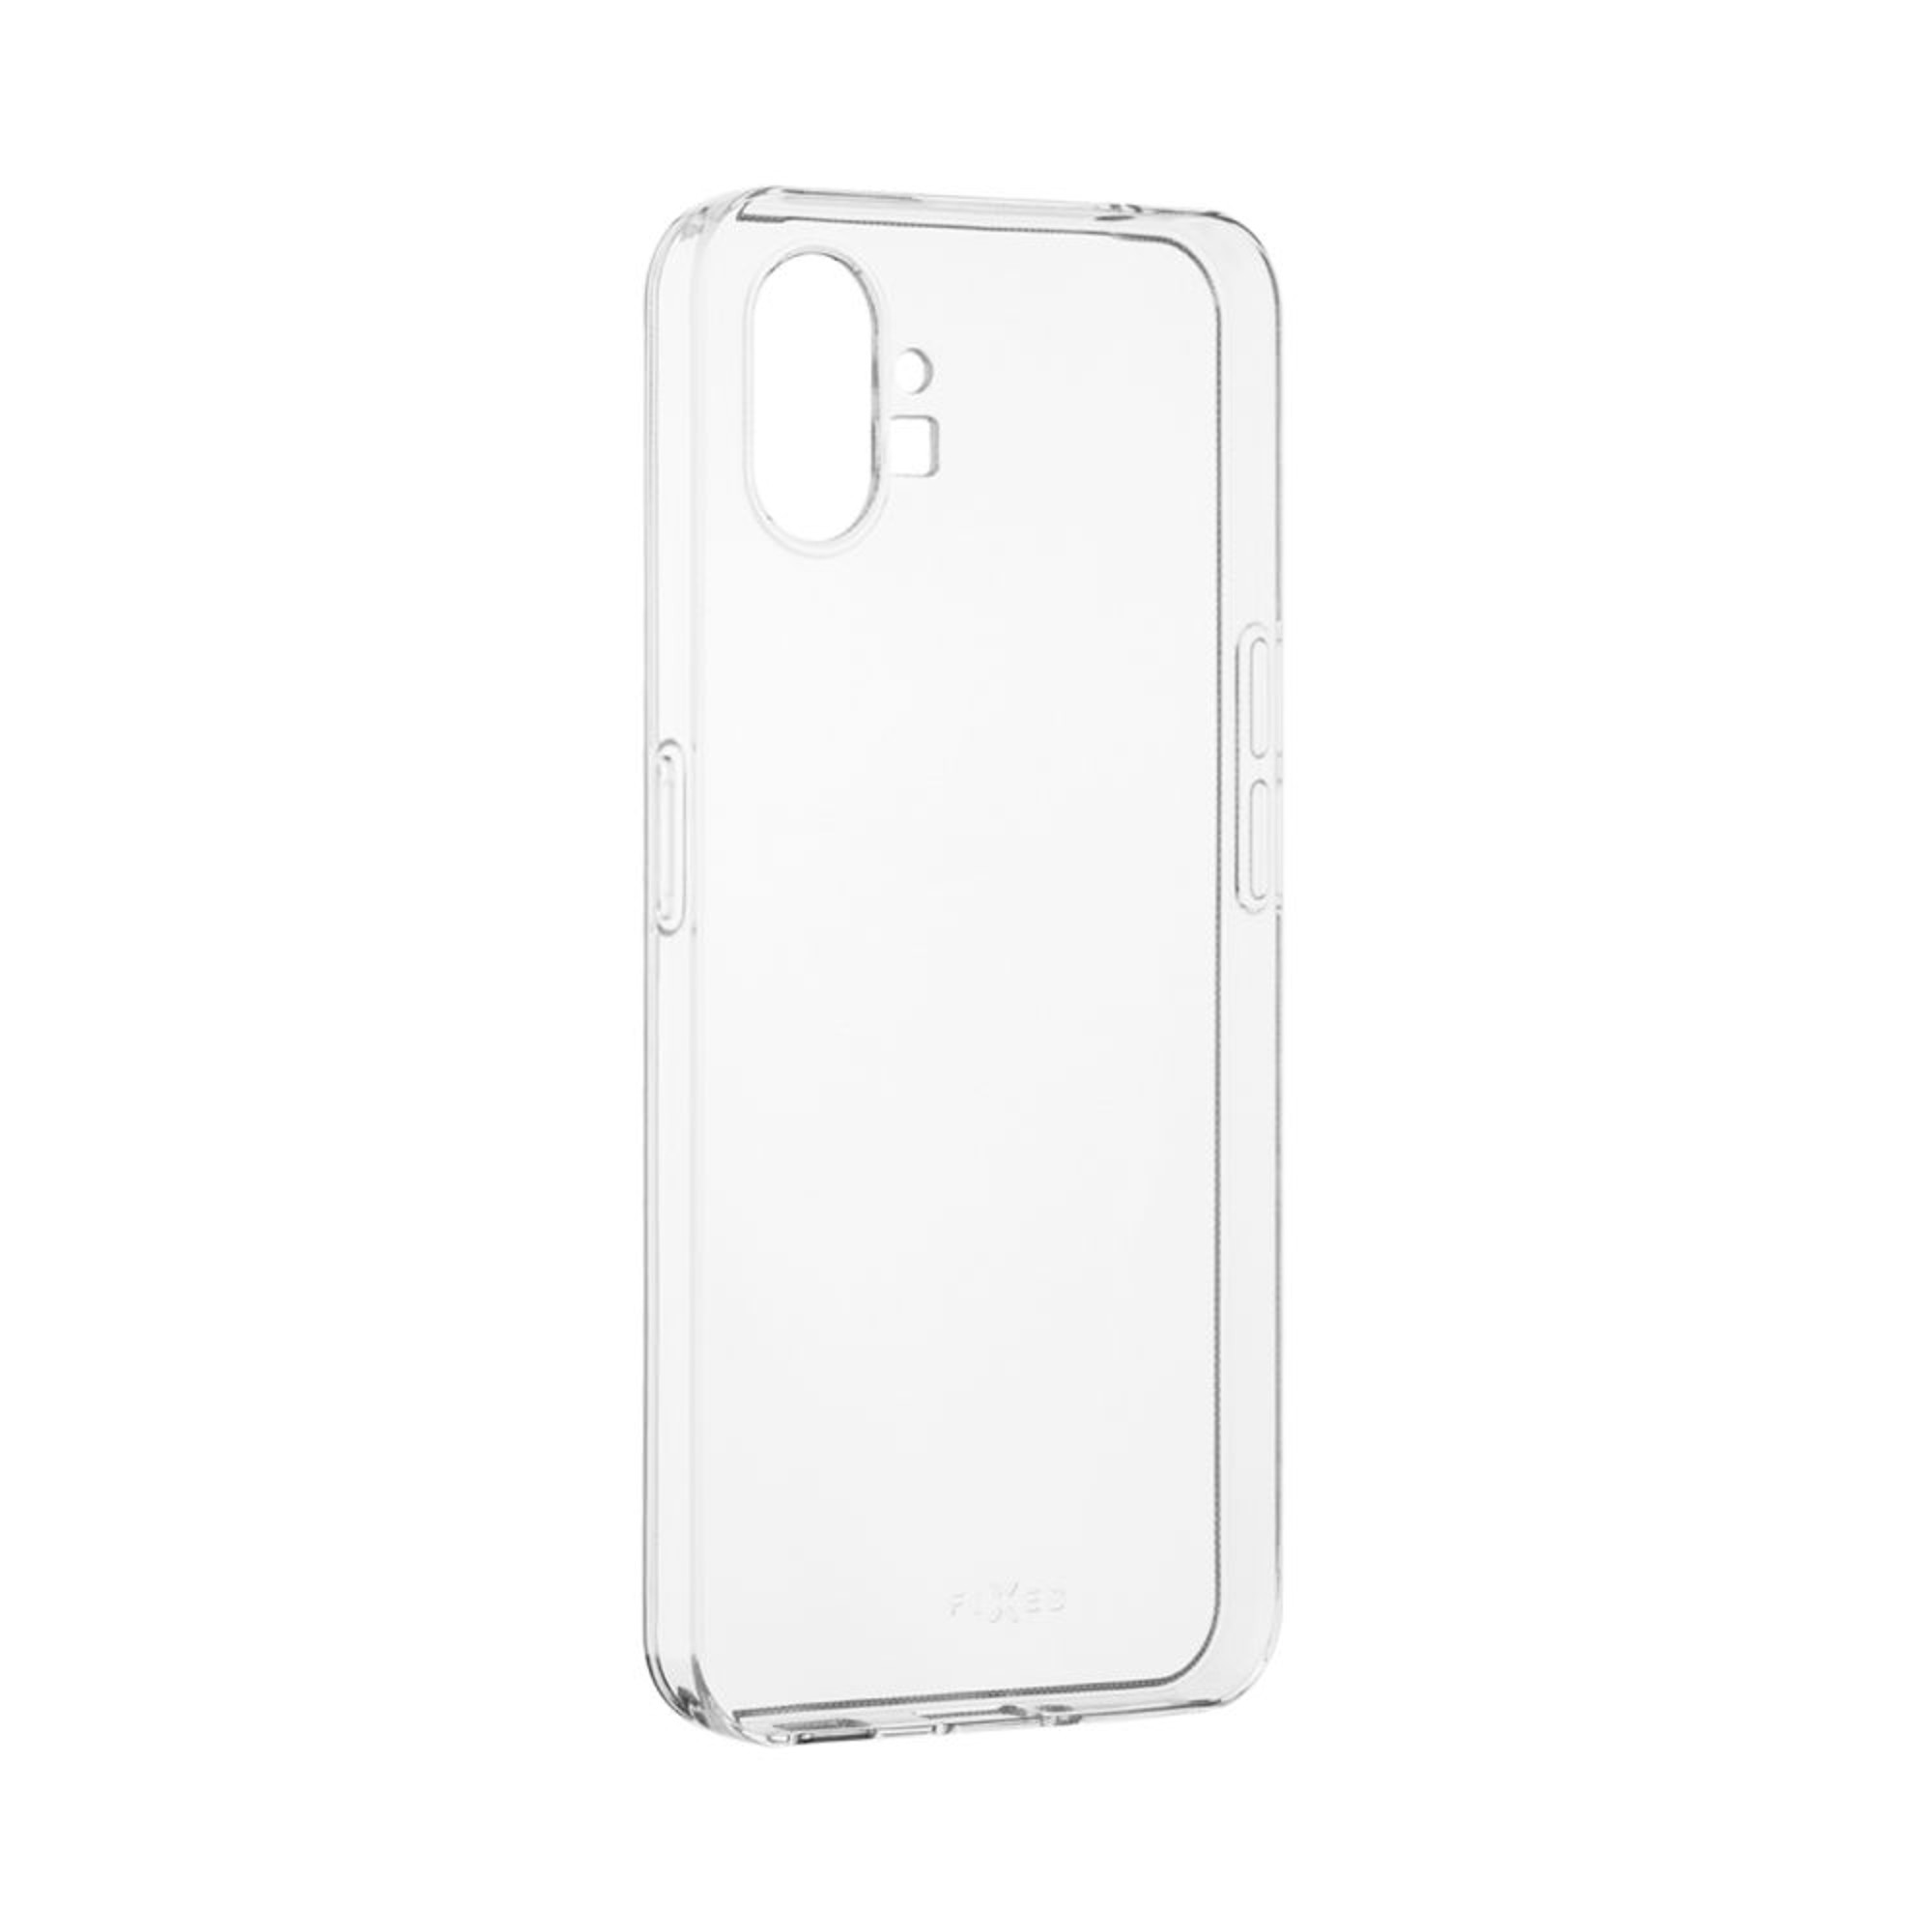 Transparente Nothing, (1), FIXTCC-1005, phone FIXED Backcover,